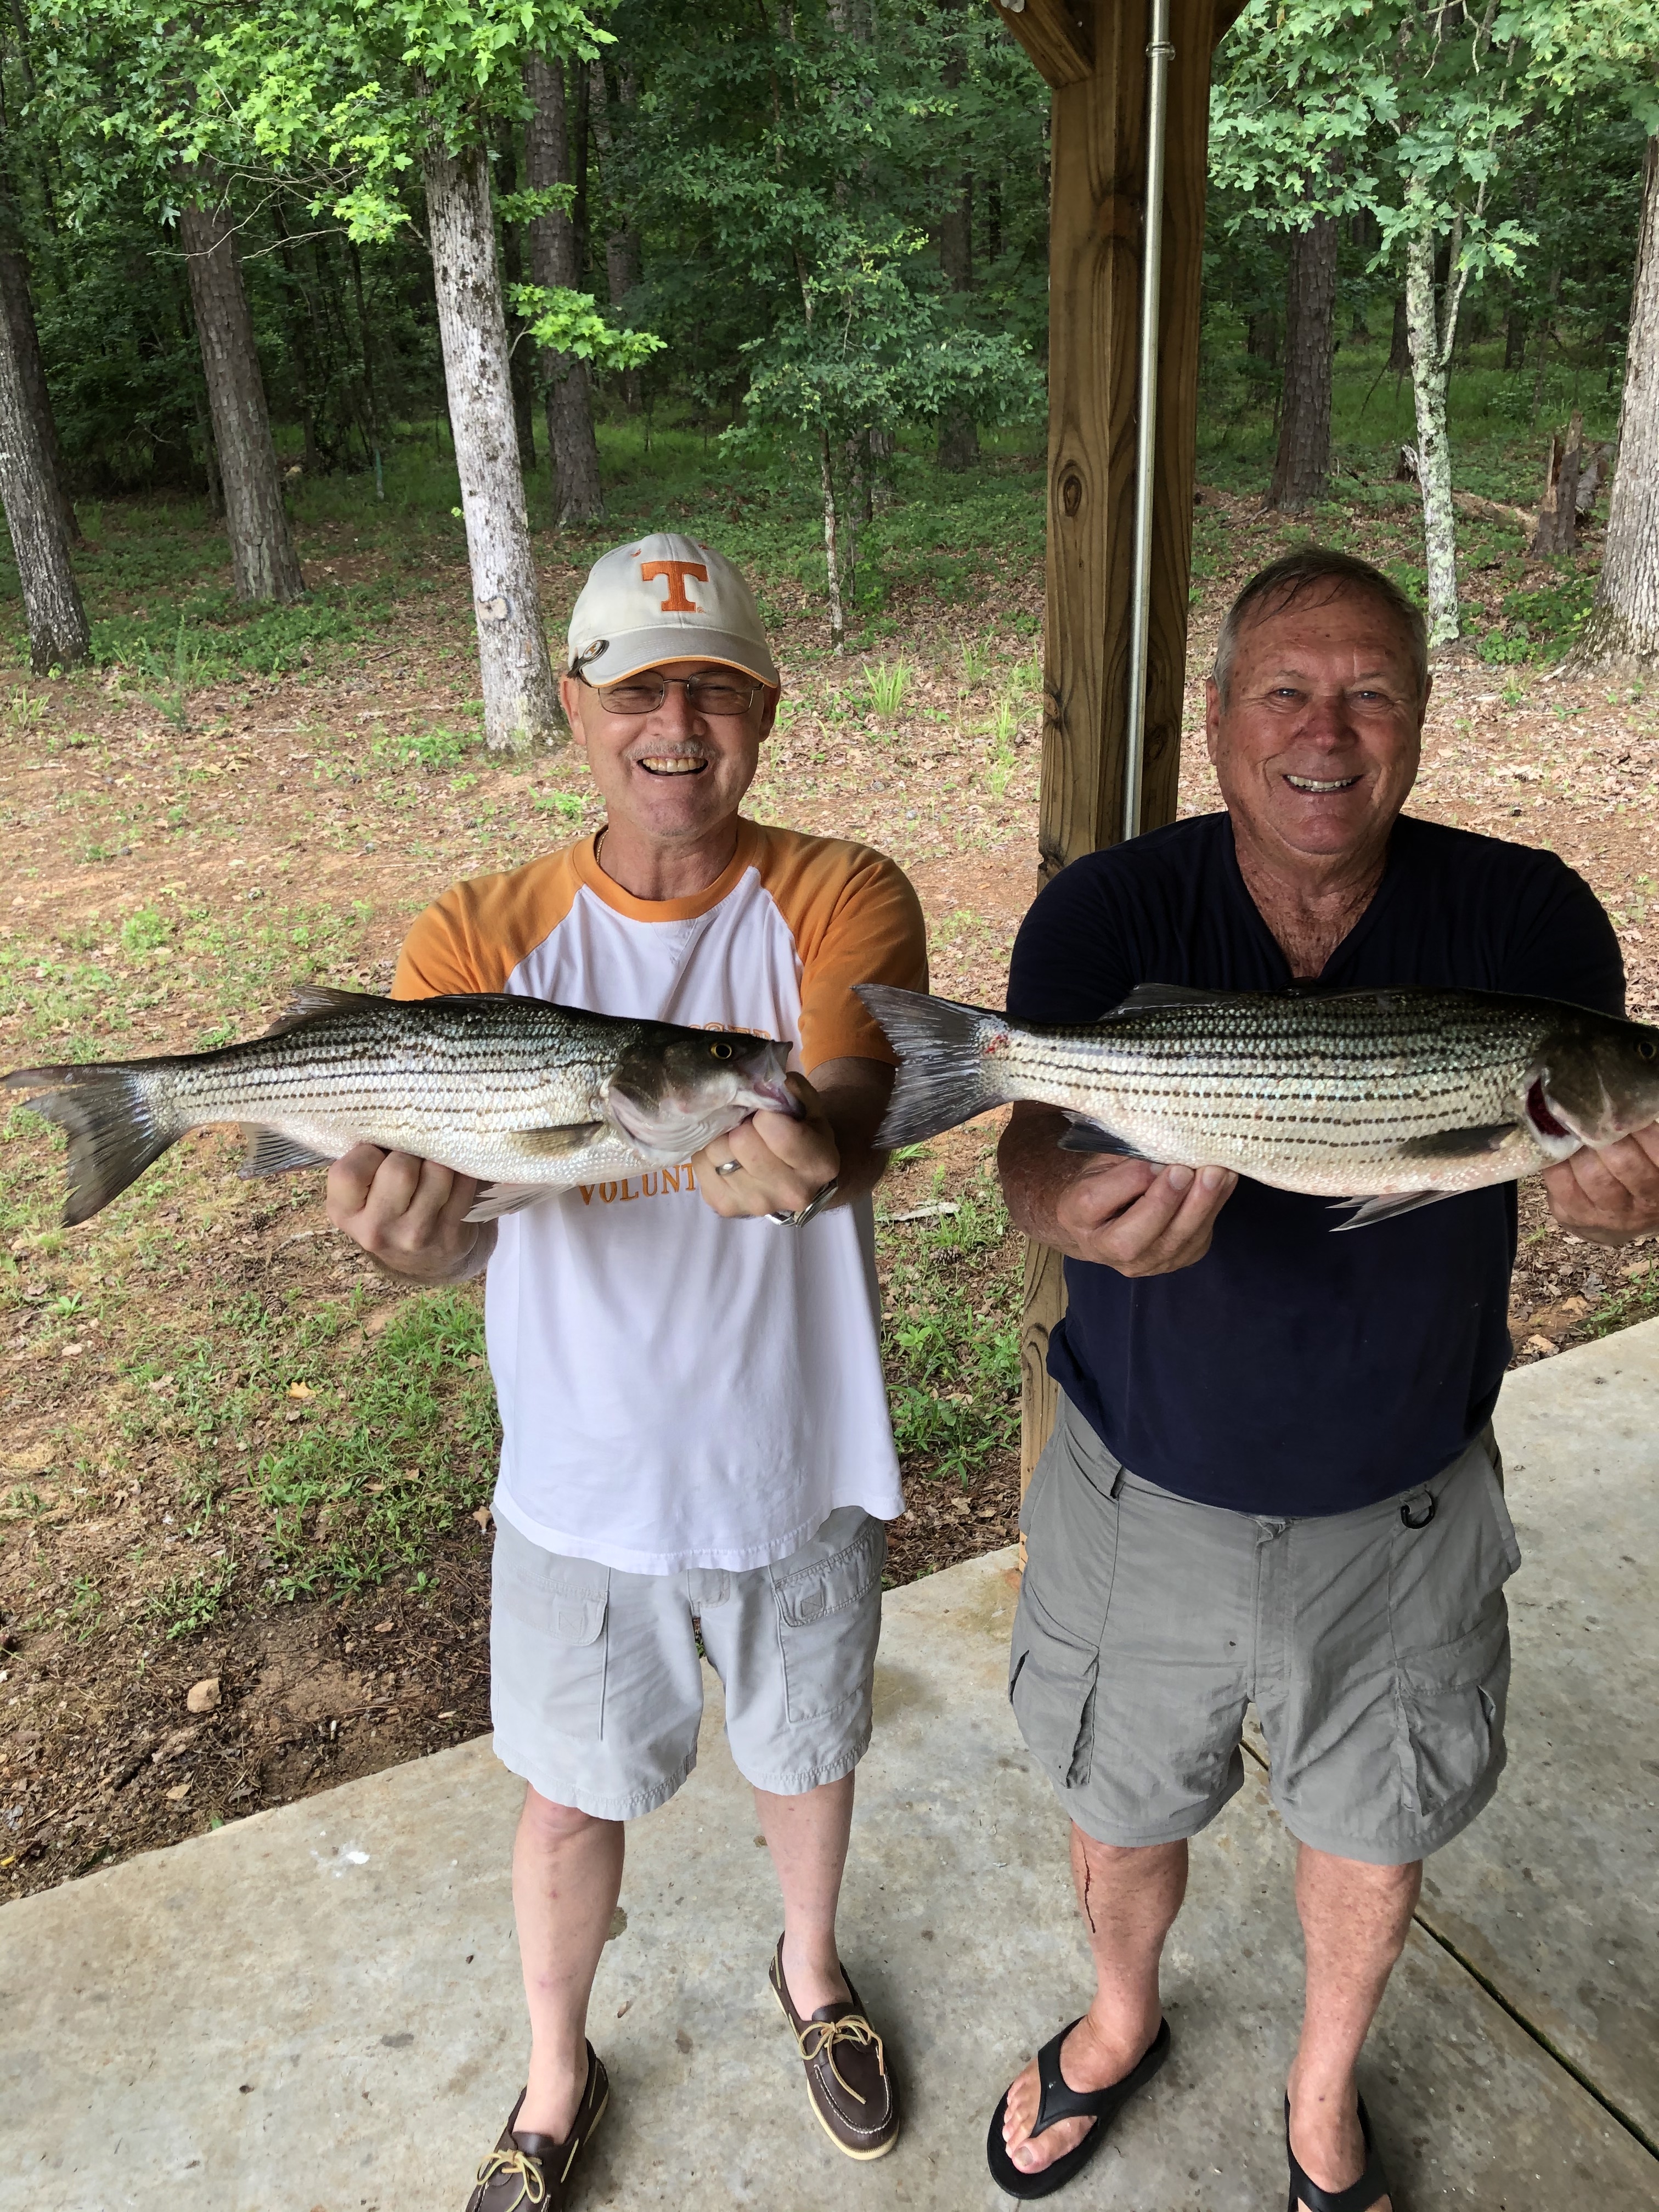 June-4-2020-David-Mottern-and-Jay-Ash-with-two-nice-fish-IMG_3214